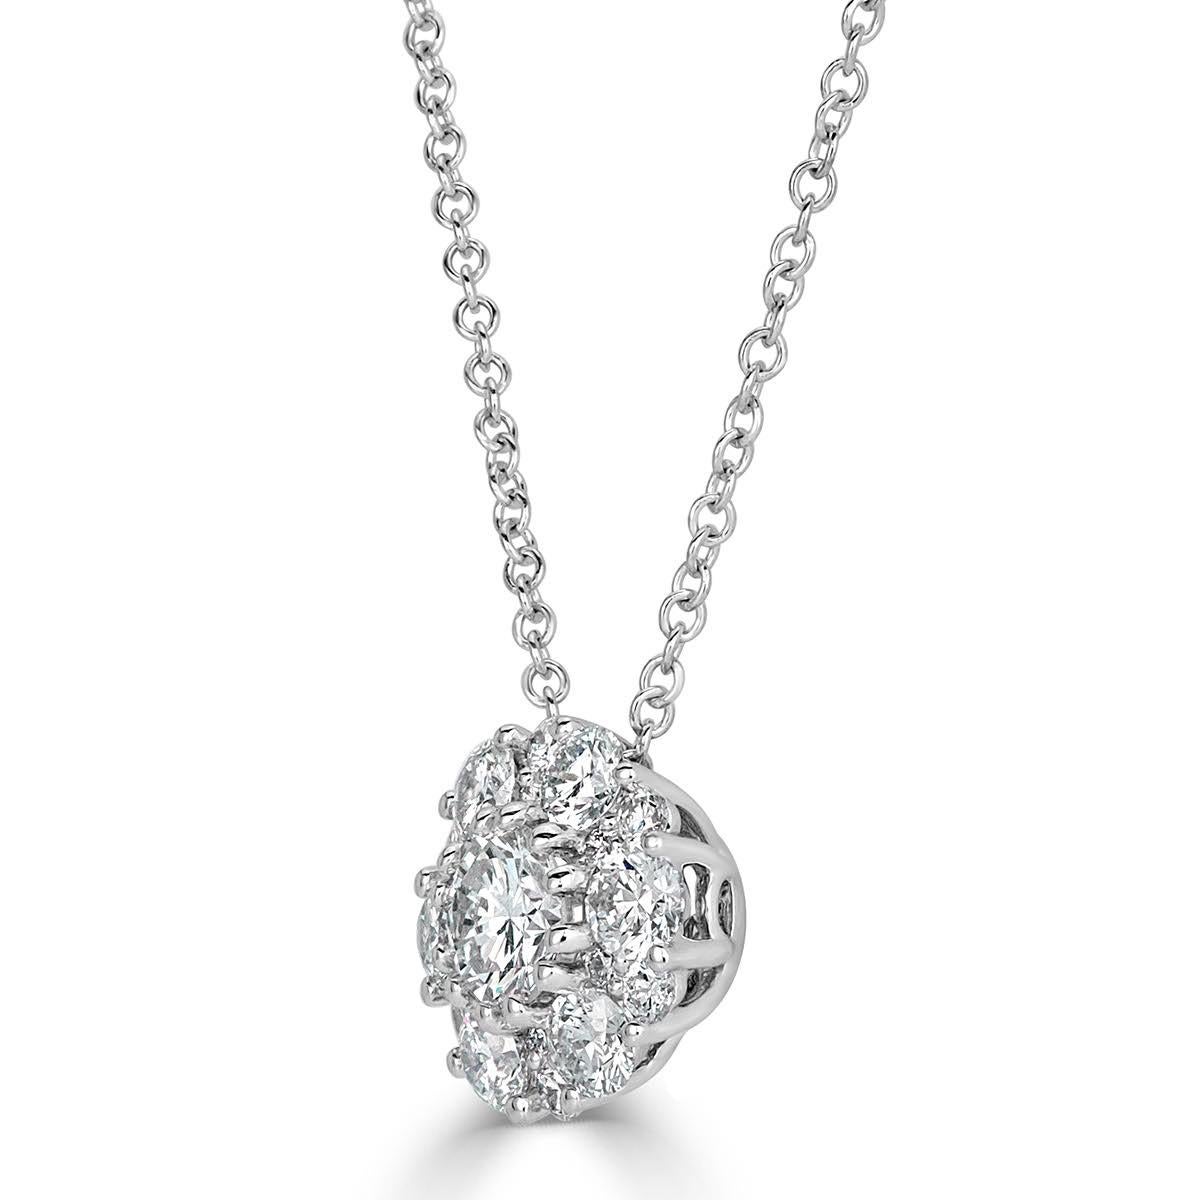 Handcrafted in 18k white gold, this ravishing diamond pendant showcases 0.71ct of round brilliant cut diamonds hand set in an exquisite floral pattern. The diamonds are graded at F-G in color, VS1-VS2 in clarity.
